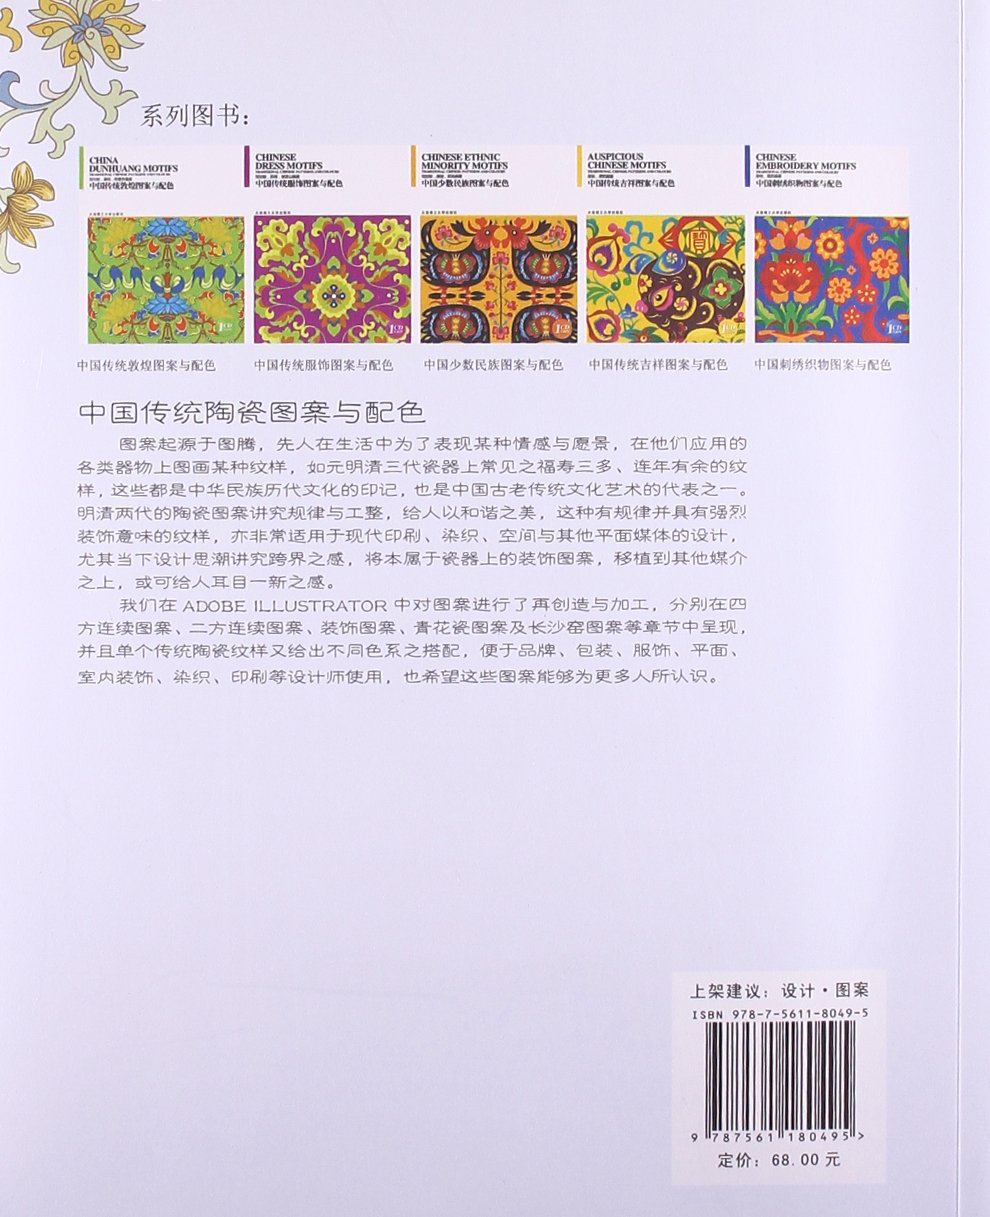 Chinese Porcelain Motifs Traditional Chinese Patterns and Colours中国传统陶瓷图案与配色 平装 – 2013年8月1日 by 邹加勉 (作者), 李端妮 (作者)